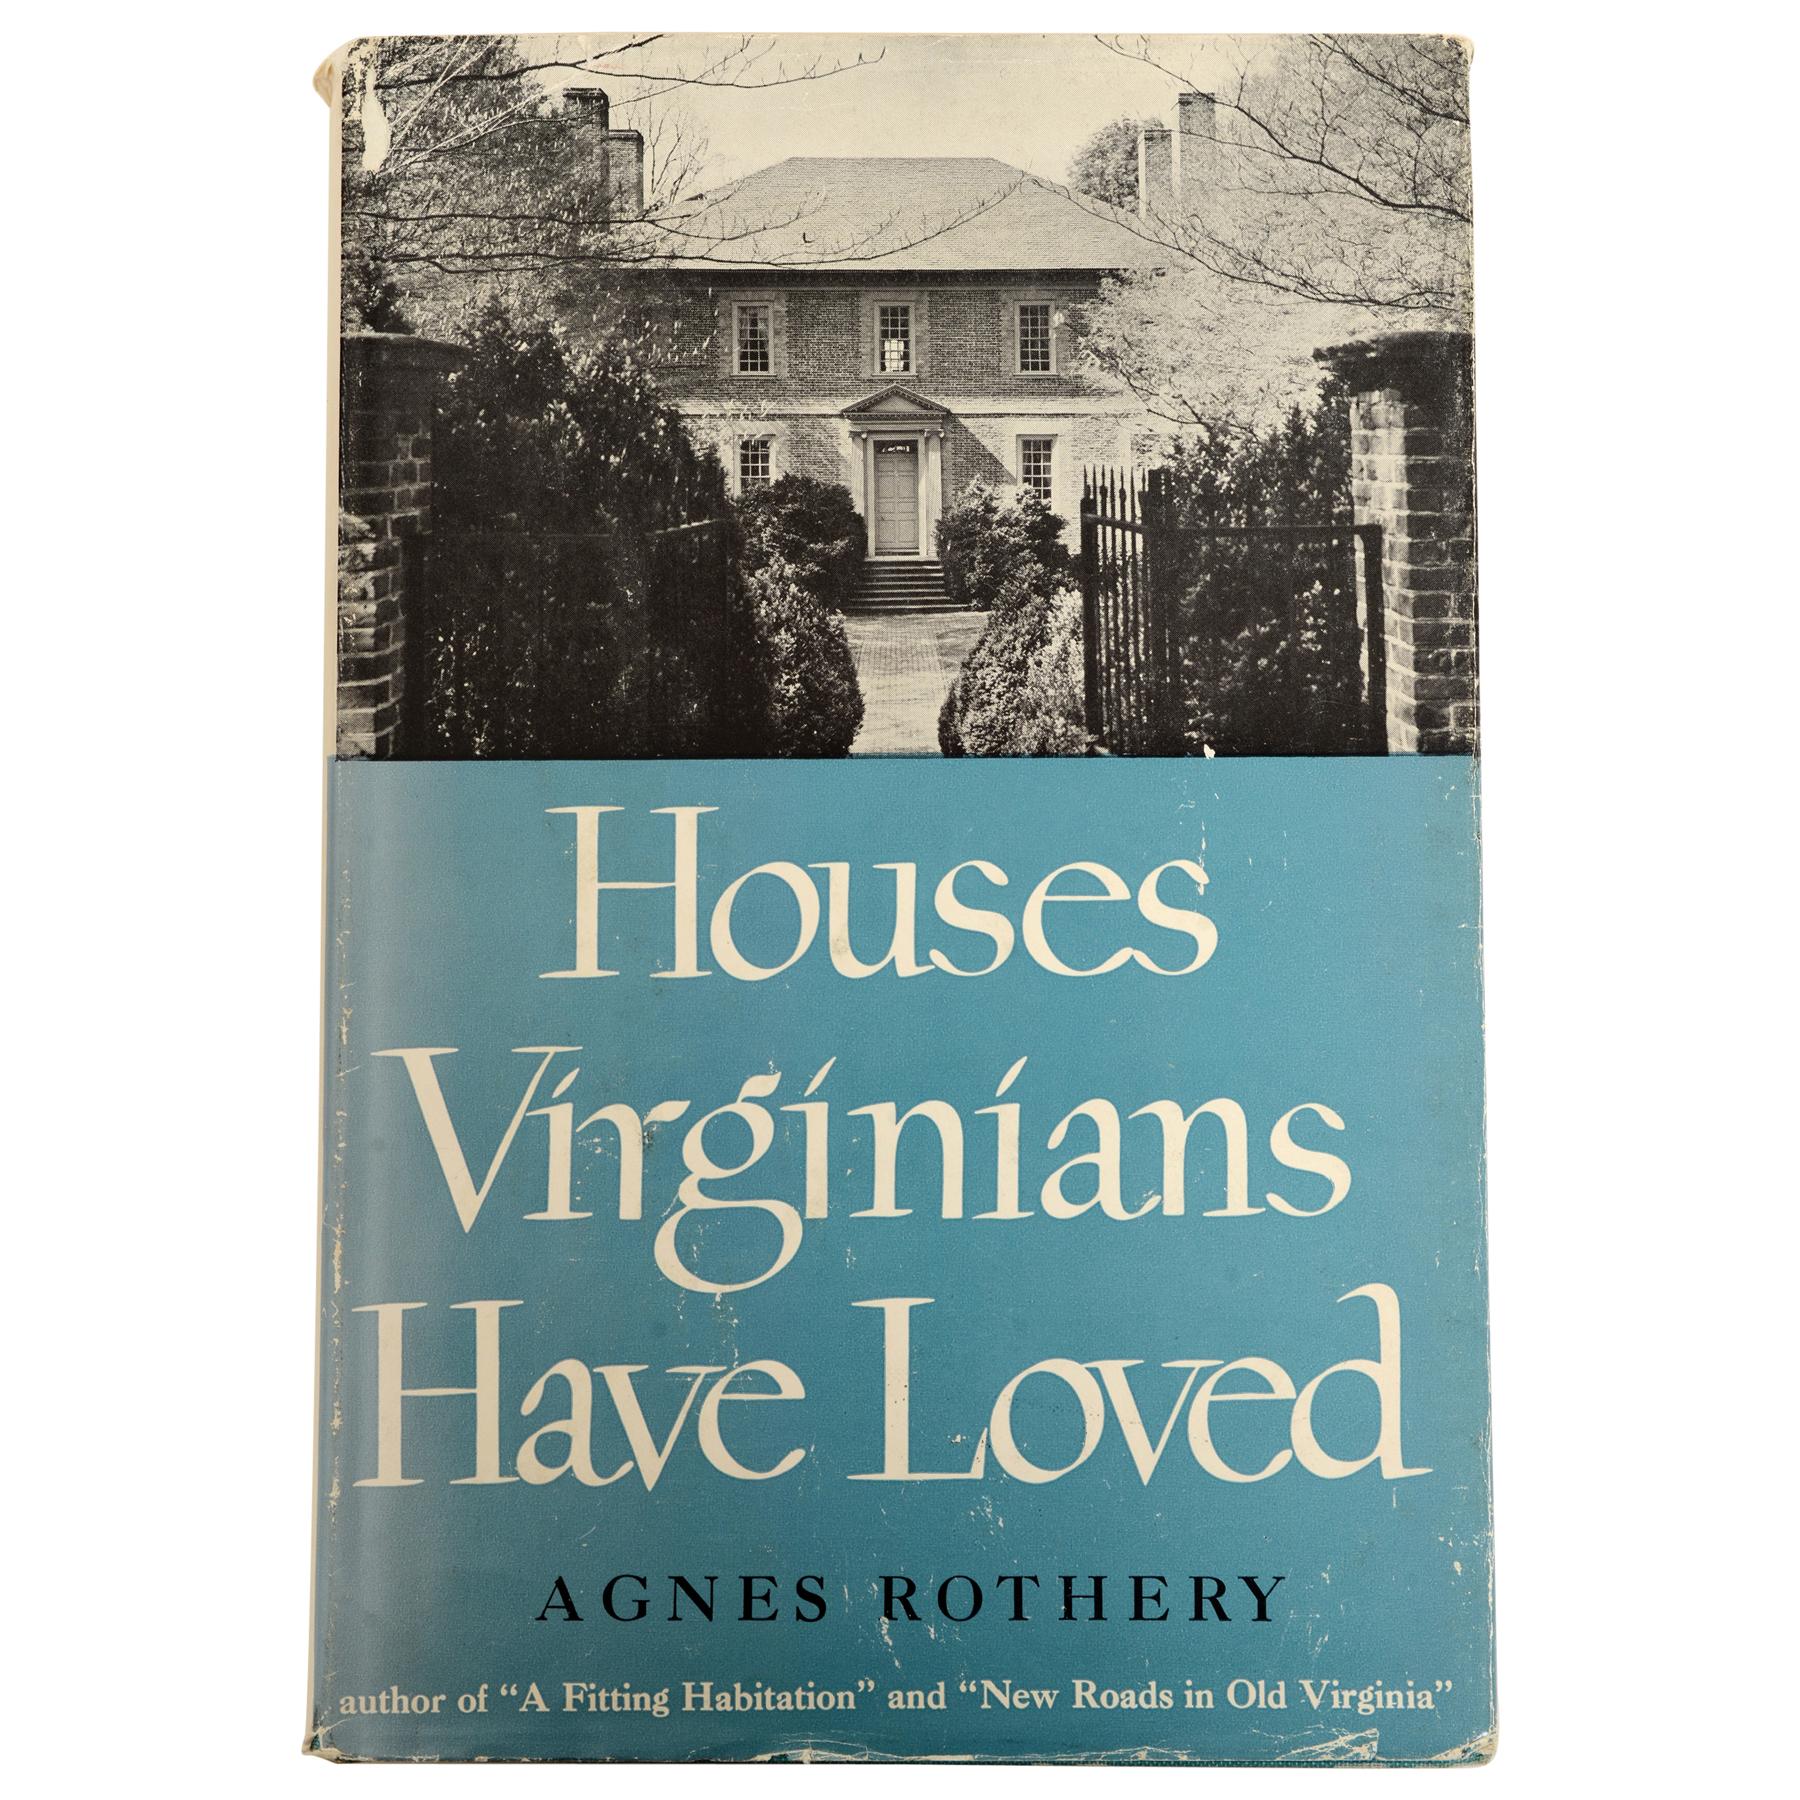 Houses Virginians Have Loved by Agnes Rothery